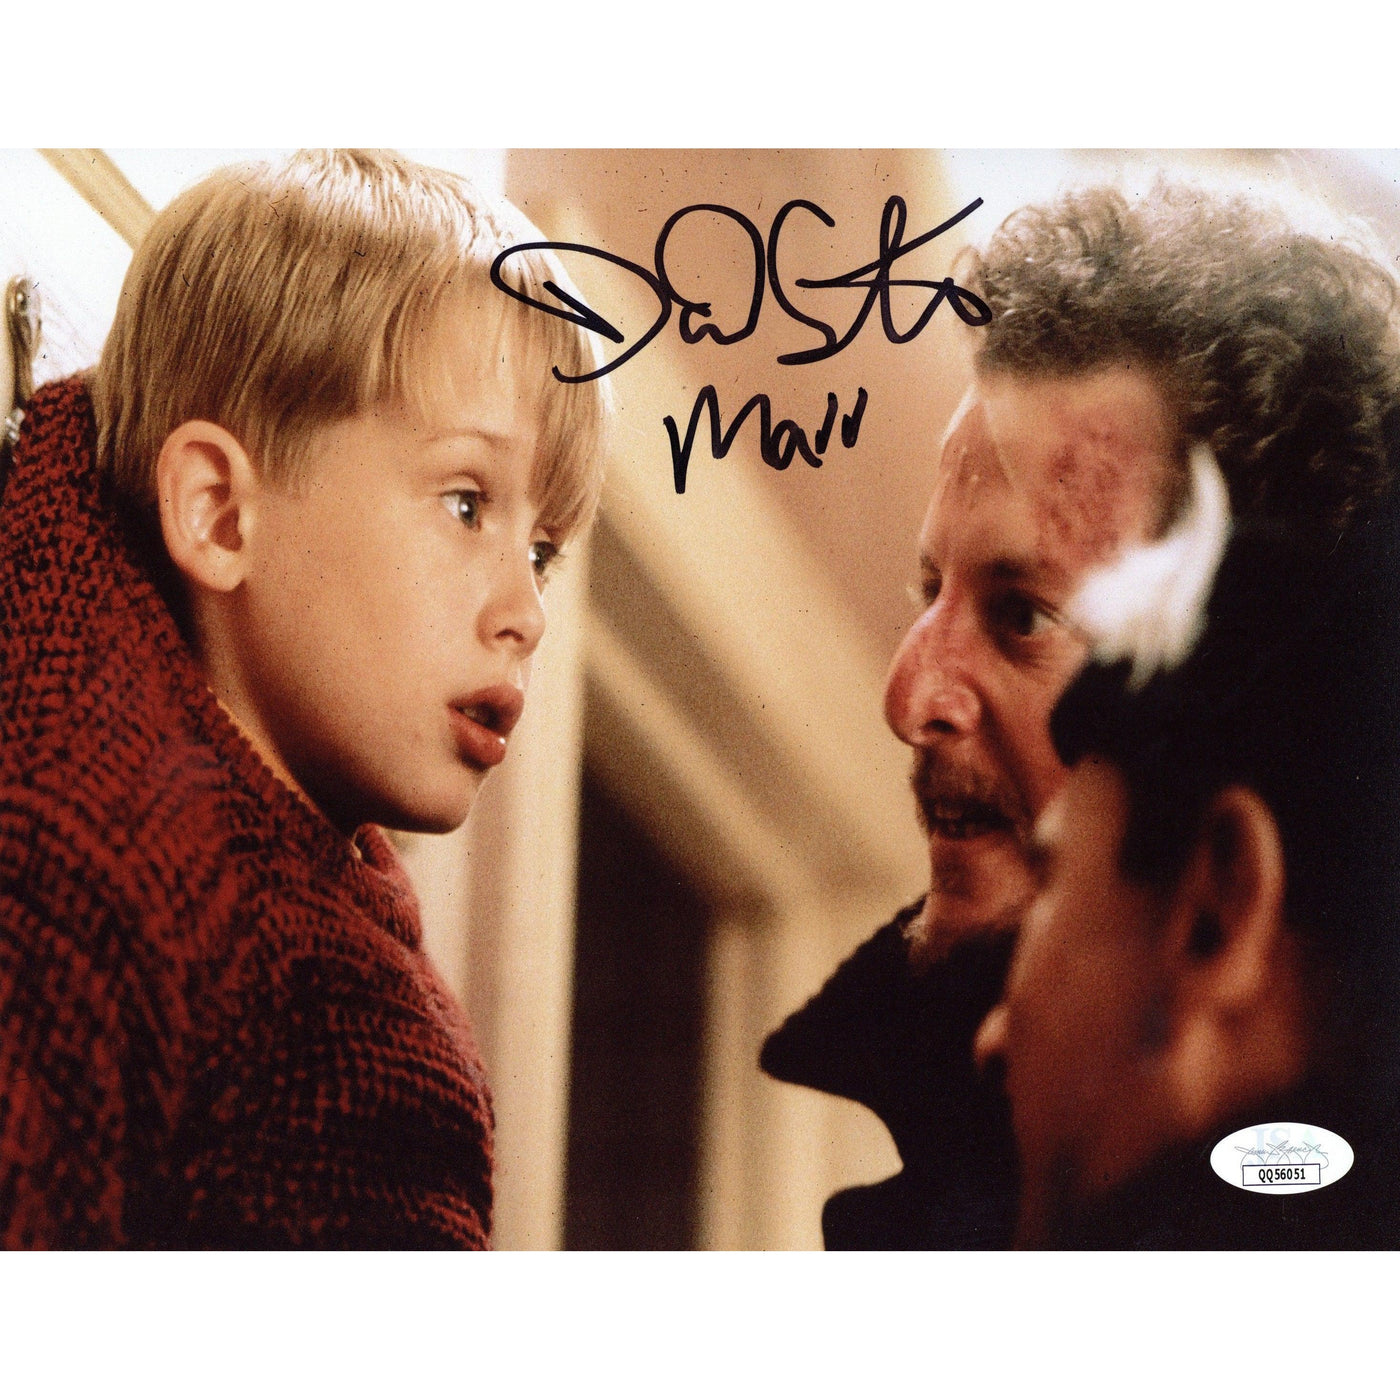 SPECIAL Daniel Stern Signed 8x10 Photo Home Alone Autographed Marv JSA COA 3